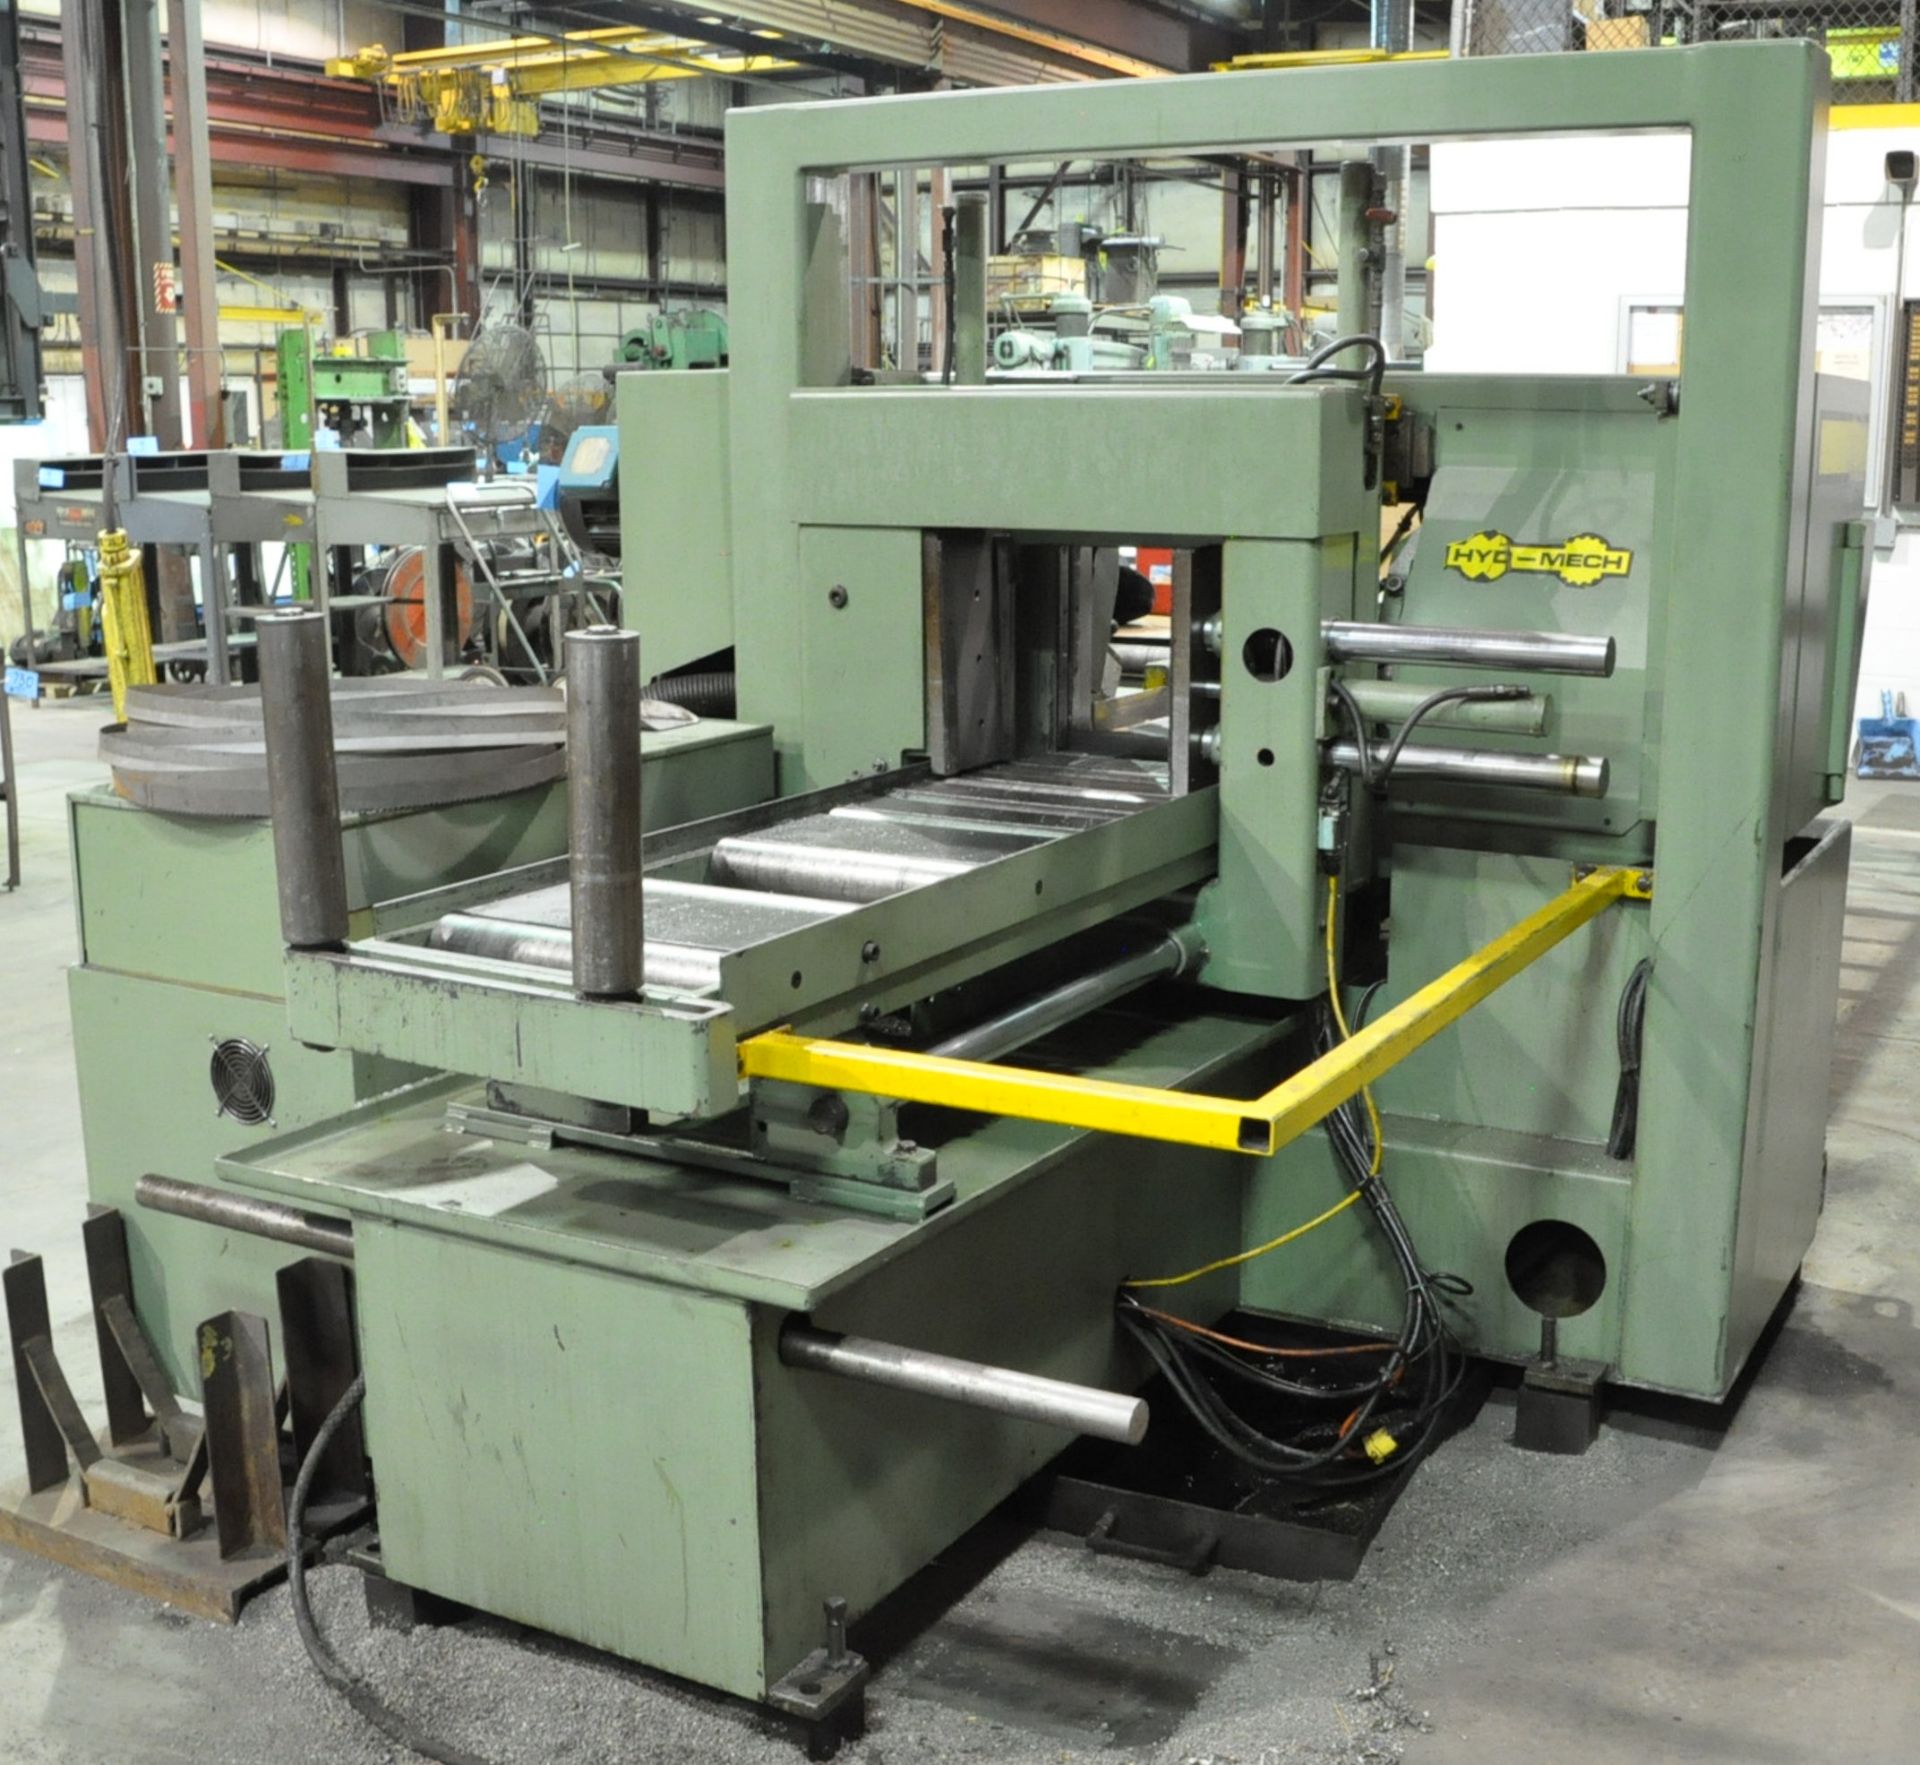 Hyd-Mech Model H14A, 14" x 14" Fully Automatic Horizontal Bandsaw, PLC Control, Bundle Clamps (2000) - Image 3 of 7